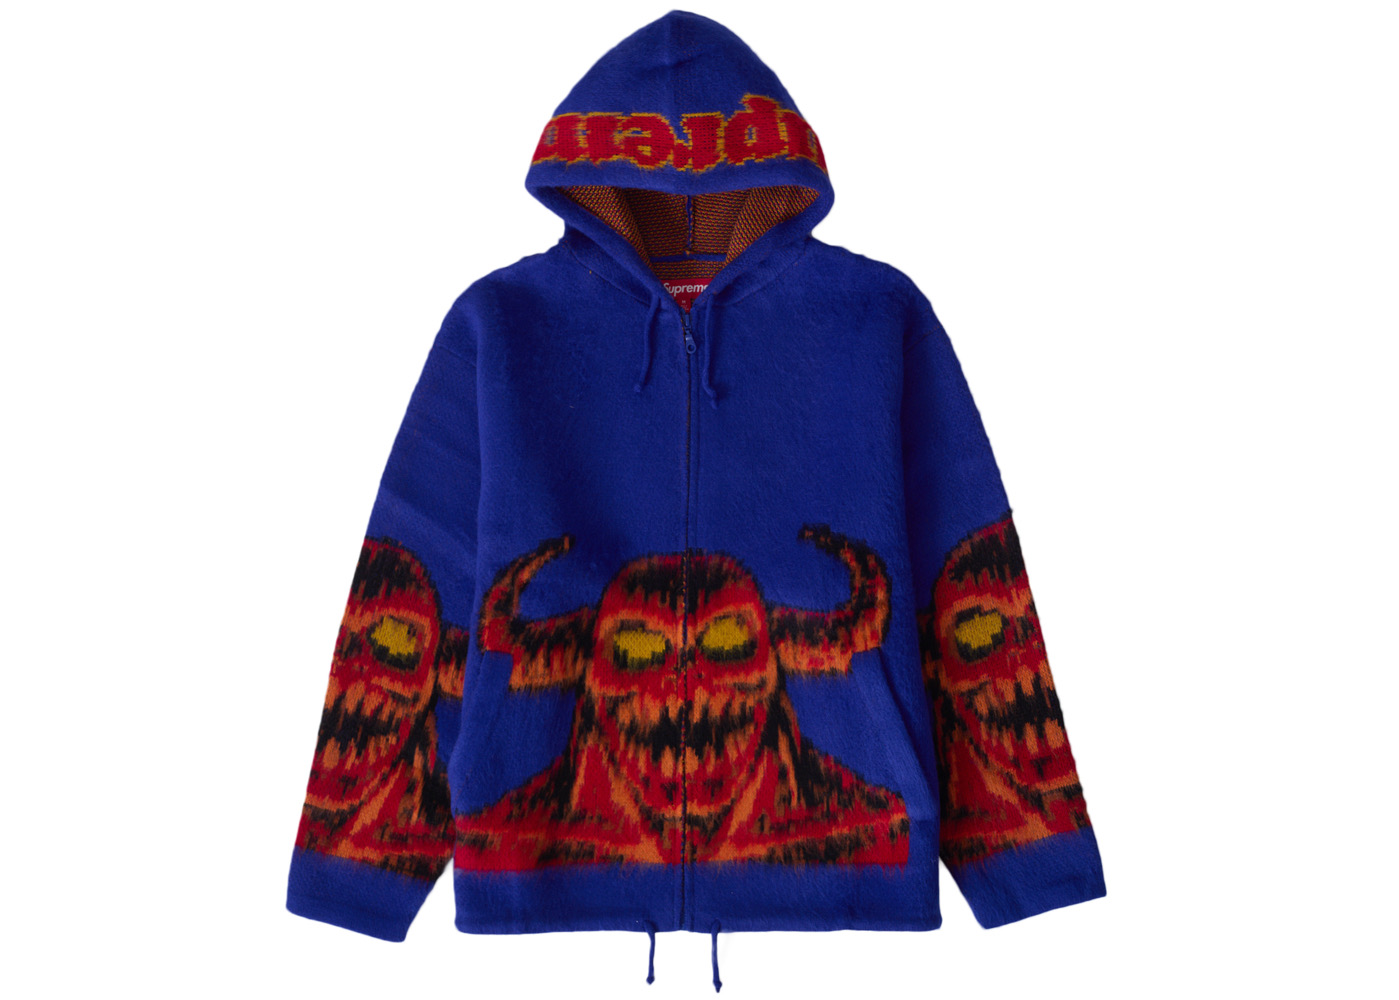 Supreme Toy Machine Zip Hooded SweaterカラーBLUE